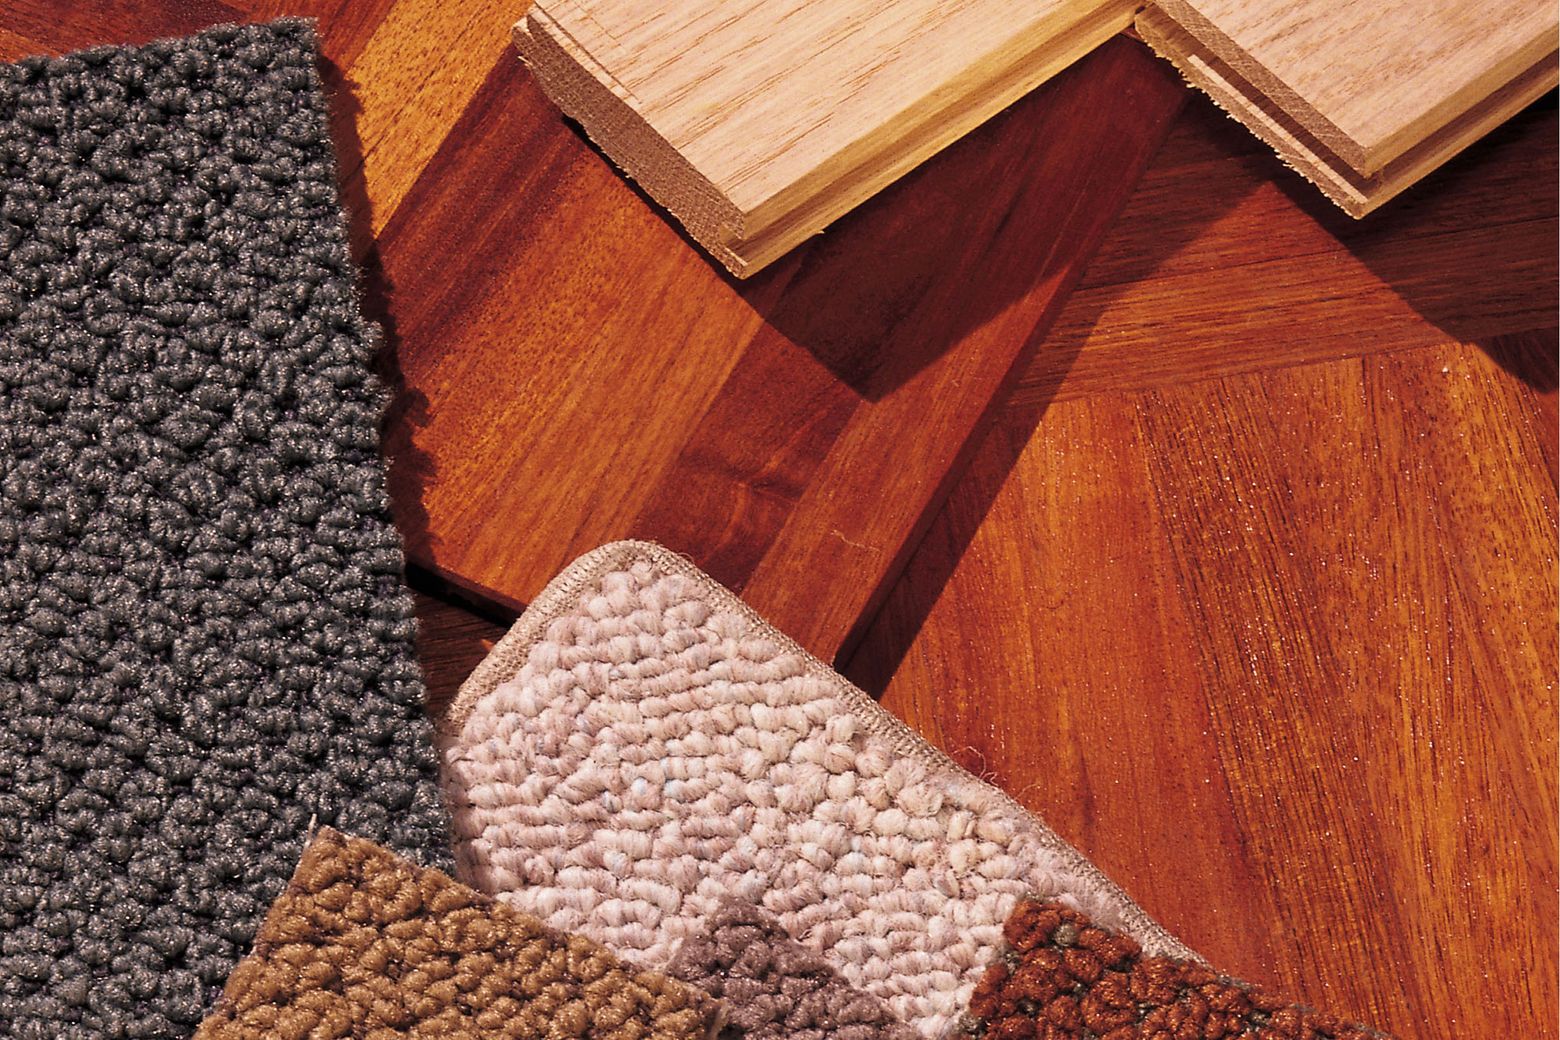 A Few Minor Problems to Consider with Stain Resistant Carpet